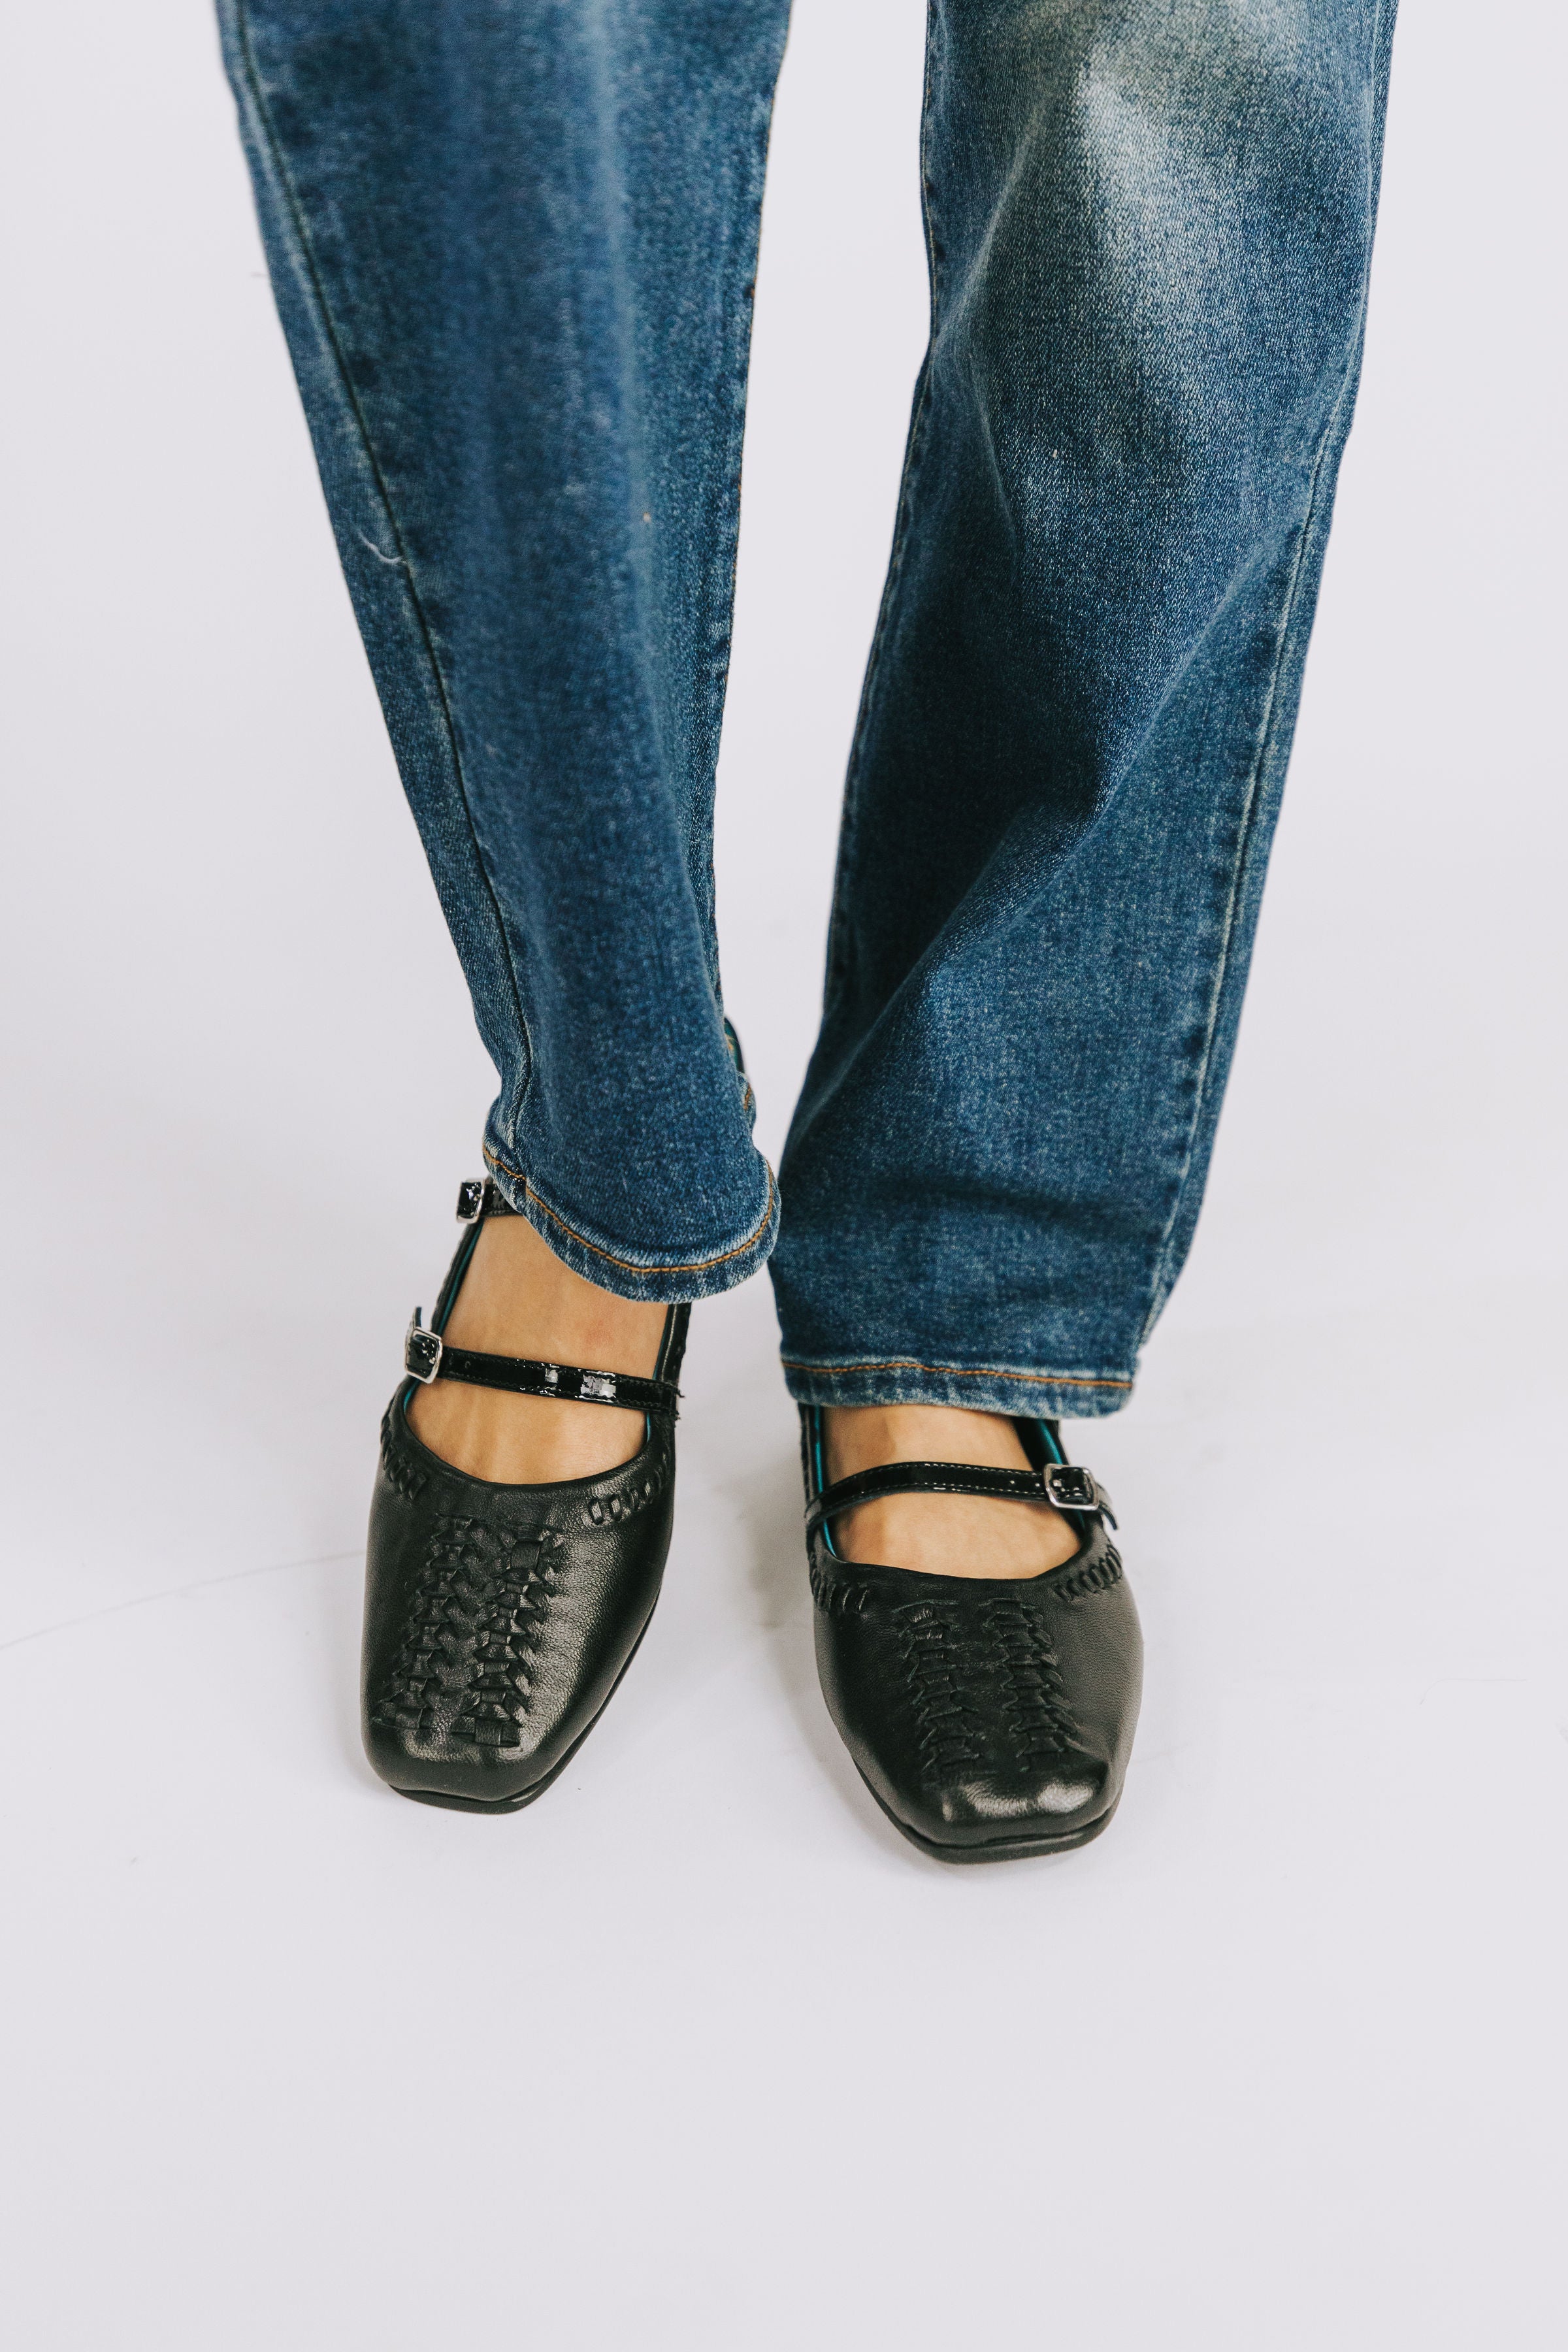 FREE PEOPLE - Diana Double Strap Flat